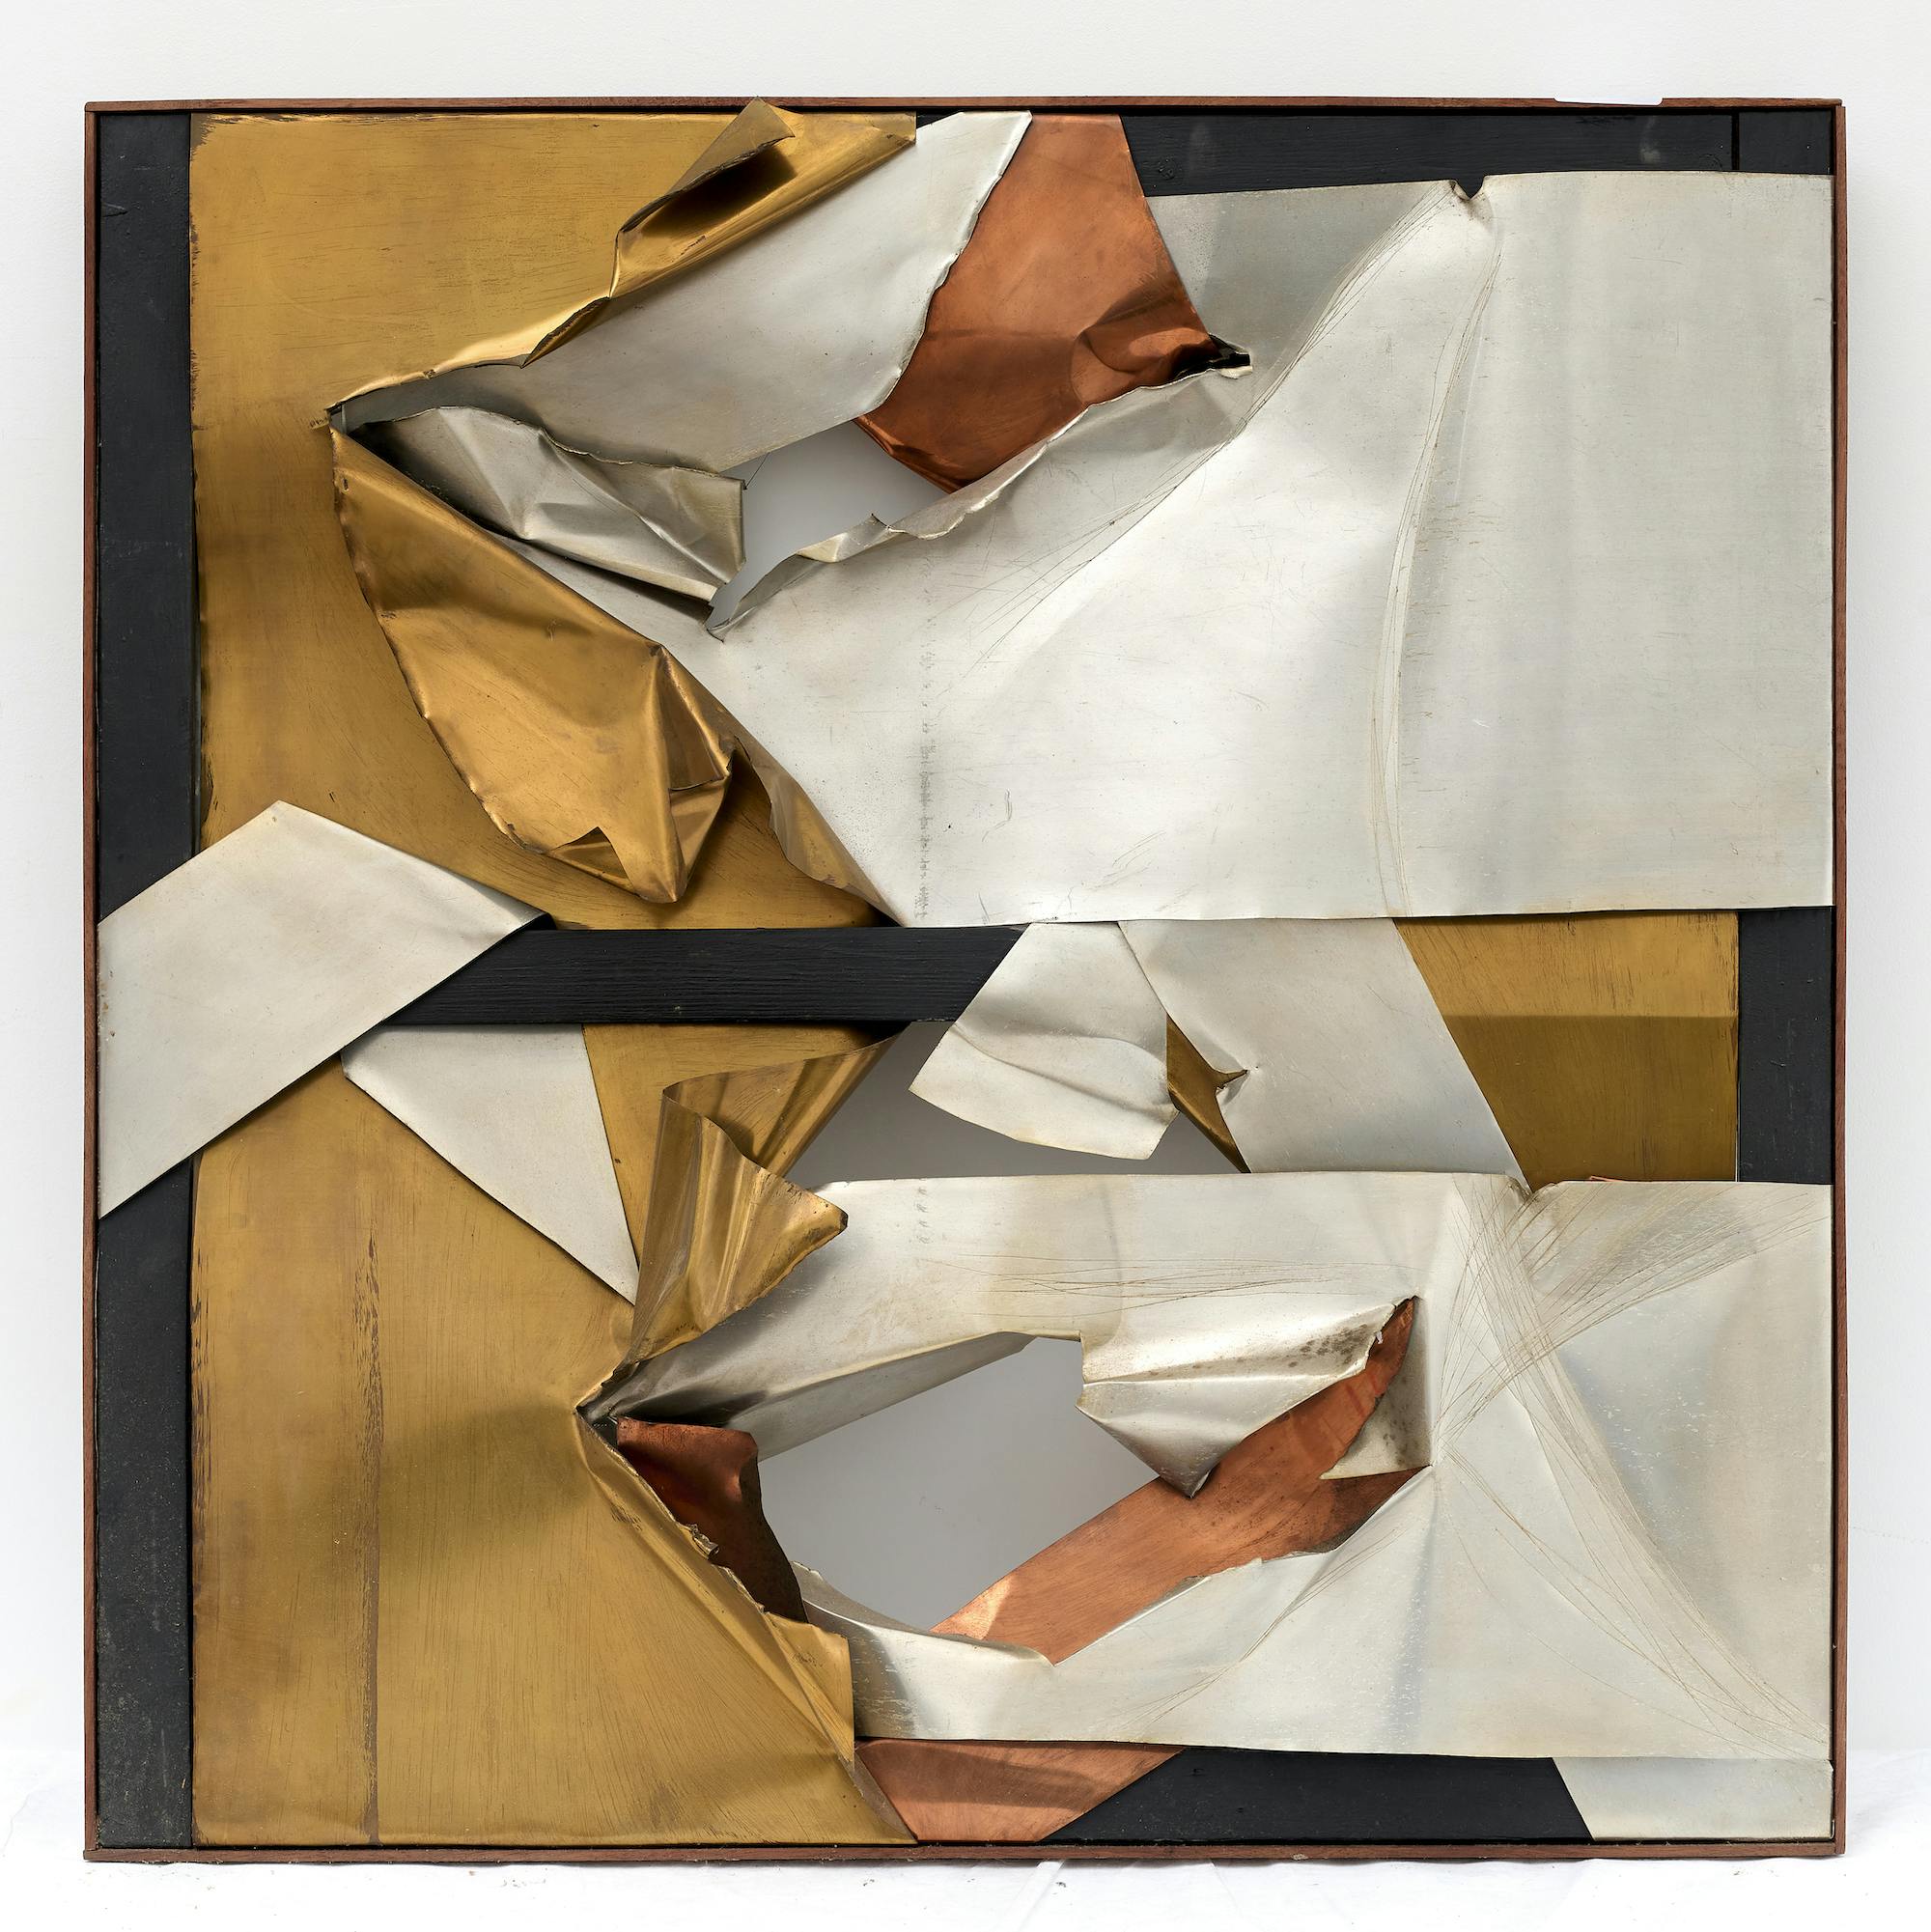 A rectangular artwork is displayed against a white wall. Wooden stretcher bars painted black compose the outer edges and horizontal center line of the work. Wrapped around, over, and under these are several layers of bronze-, silver-, and gold-colored sheet metal. These various surfaces are interwoven among one another, their jagged edges curling upward. In two places—above and below the center stretcher bar, respectively—gaps between the layers of metal appear, revealing the wall behind the work.